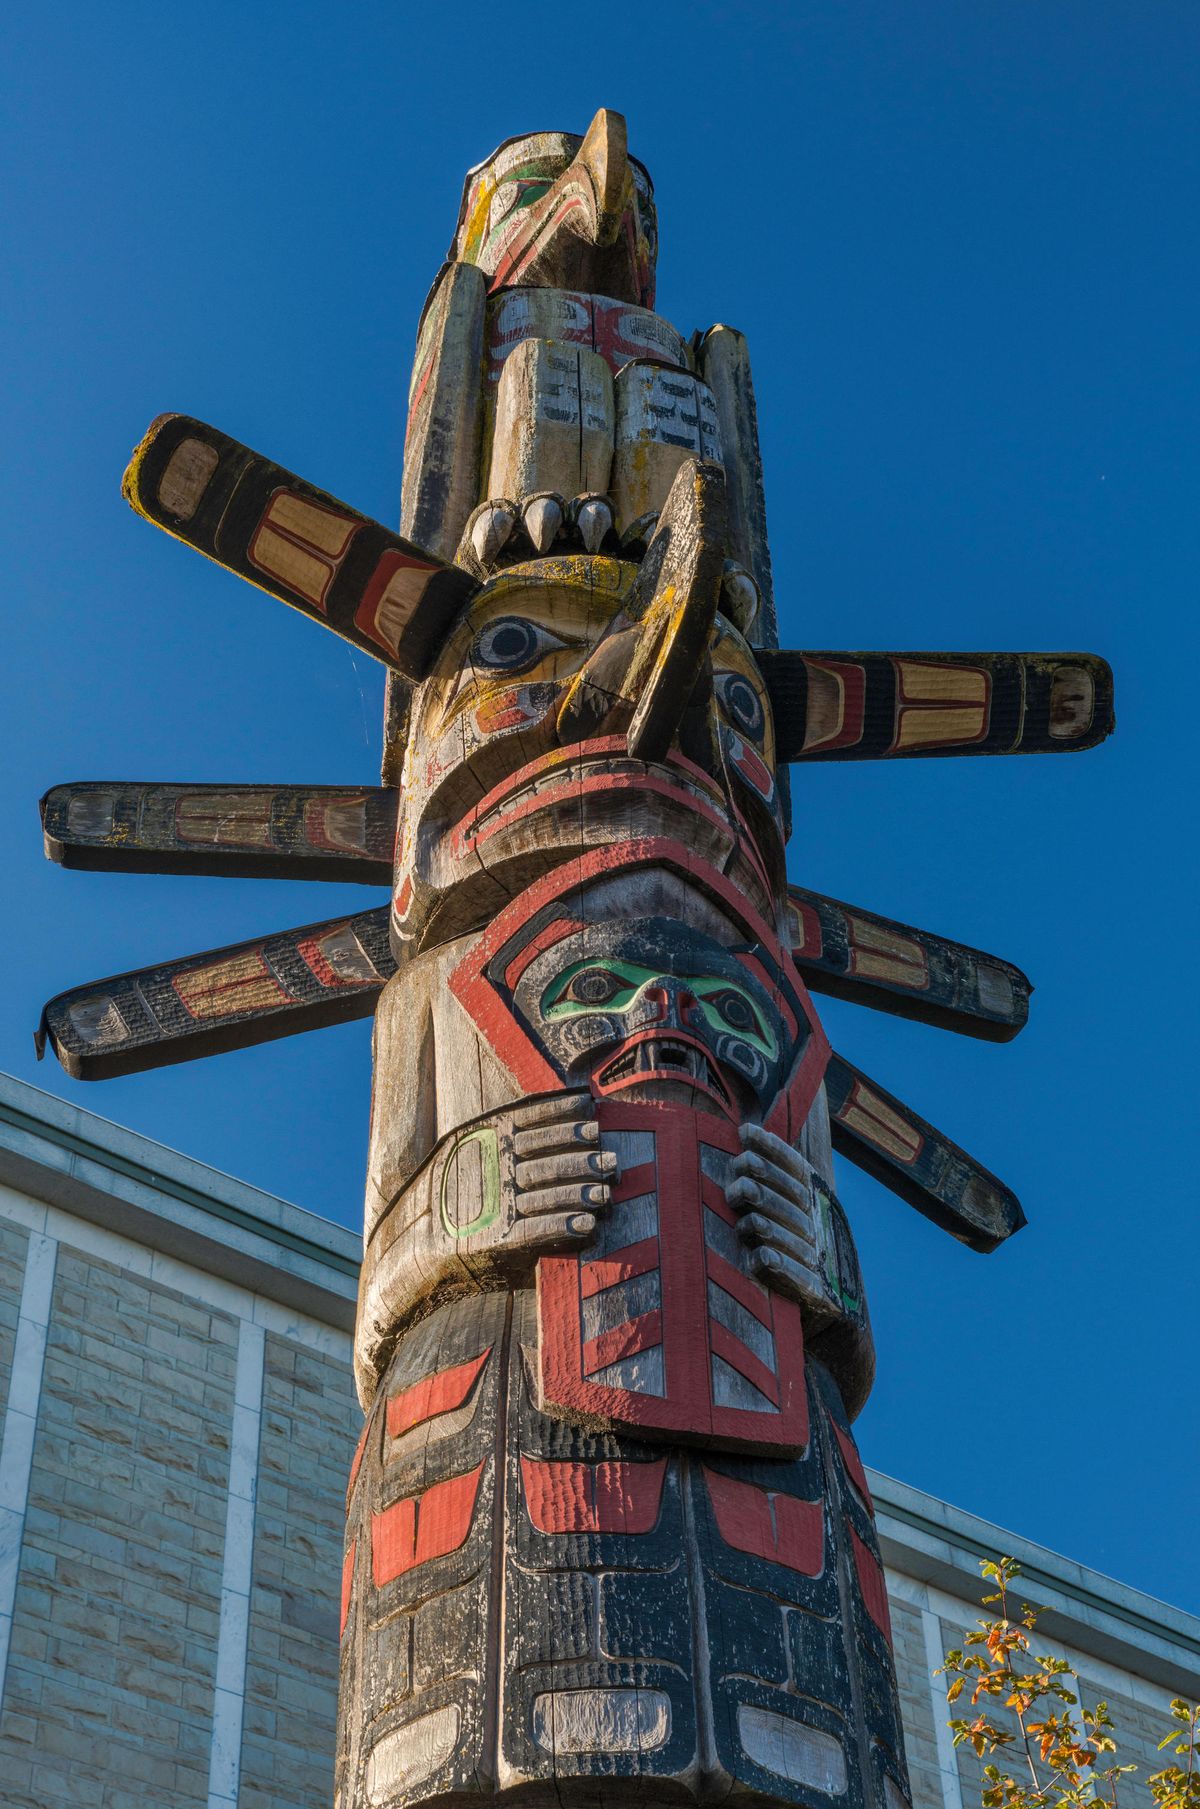 A 1979 totem pole by Kwawkewlth Tribe carver Richard Hunt at the Royal British Columbia Museum in Victoria, British Columbia, Canada Photo by Witold Skrypczak / Alamy Stock Photo